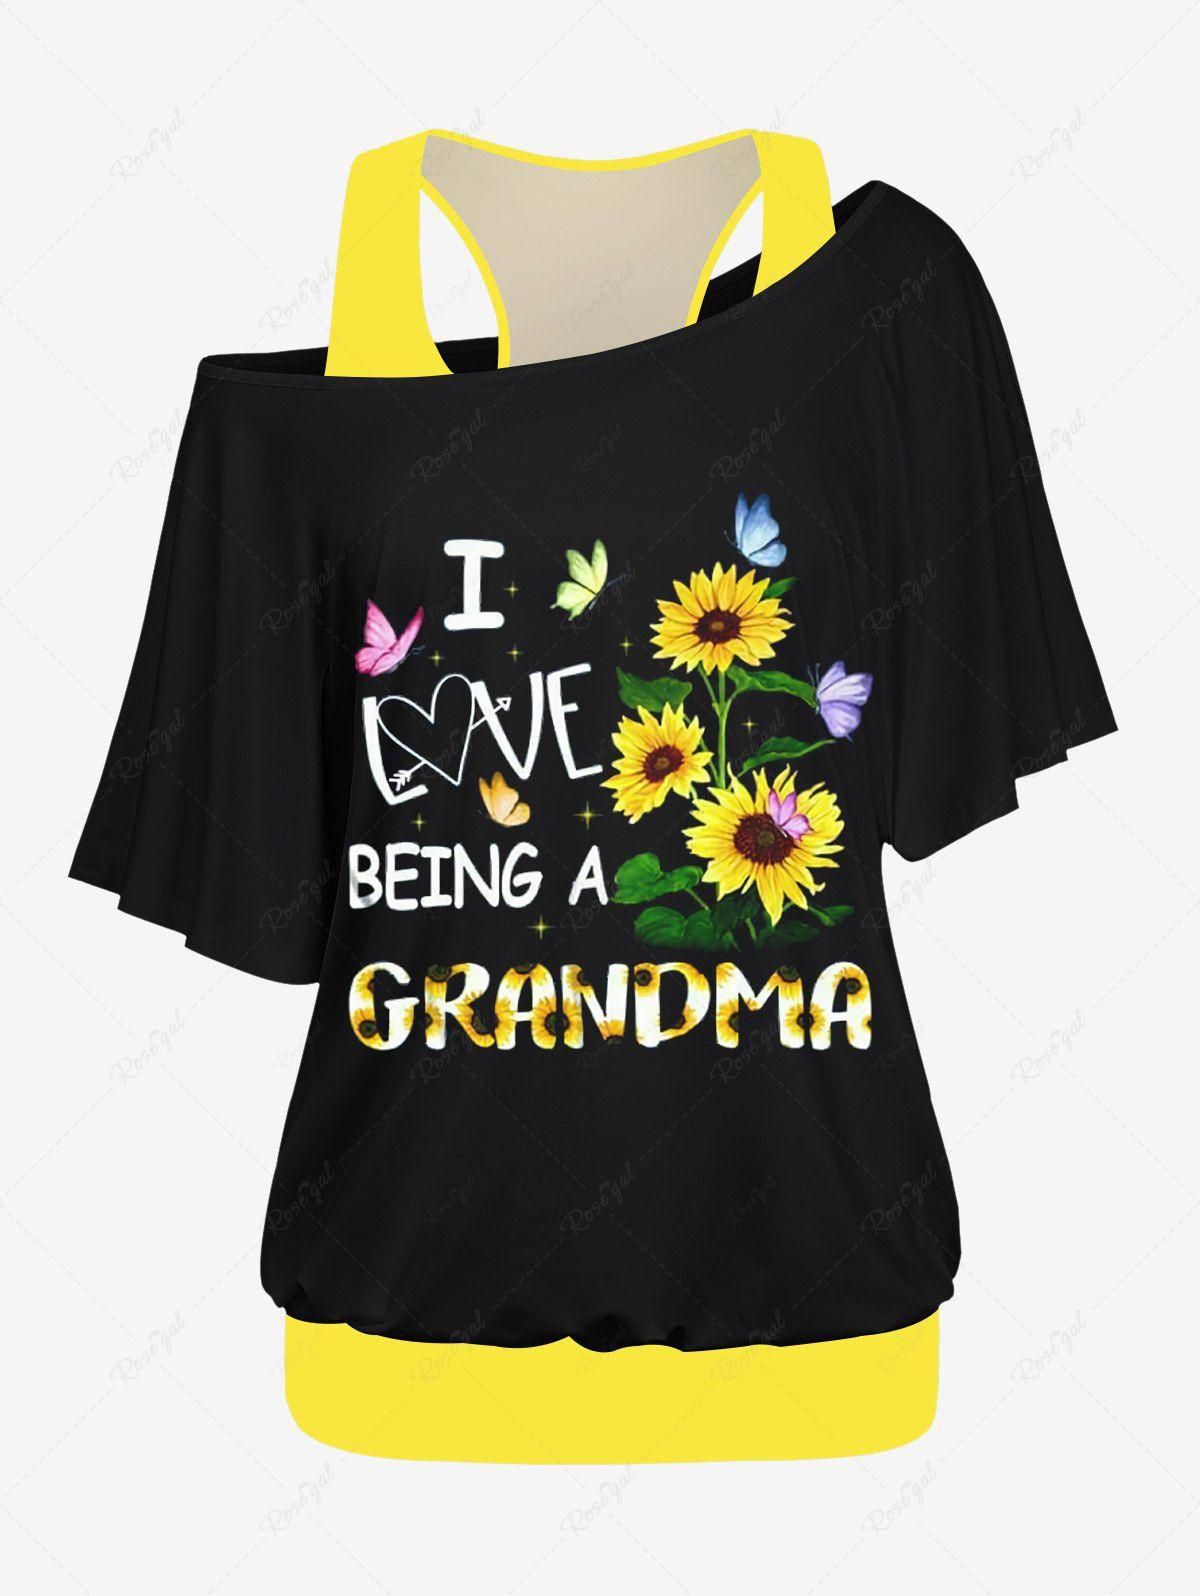 Plus Size Solid Racerback Tank Top and Sunflower Butterfly Letter Print Skew Neck Batwing Sleeves T-shirt Set - 6x